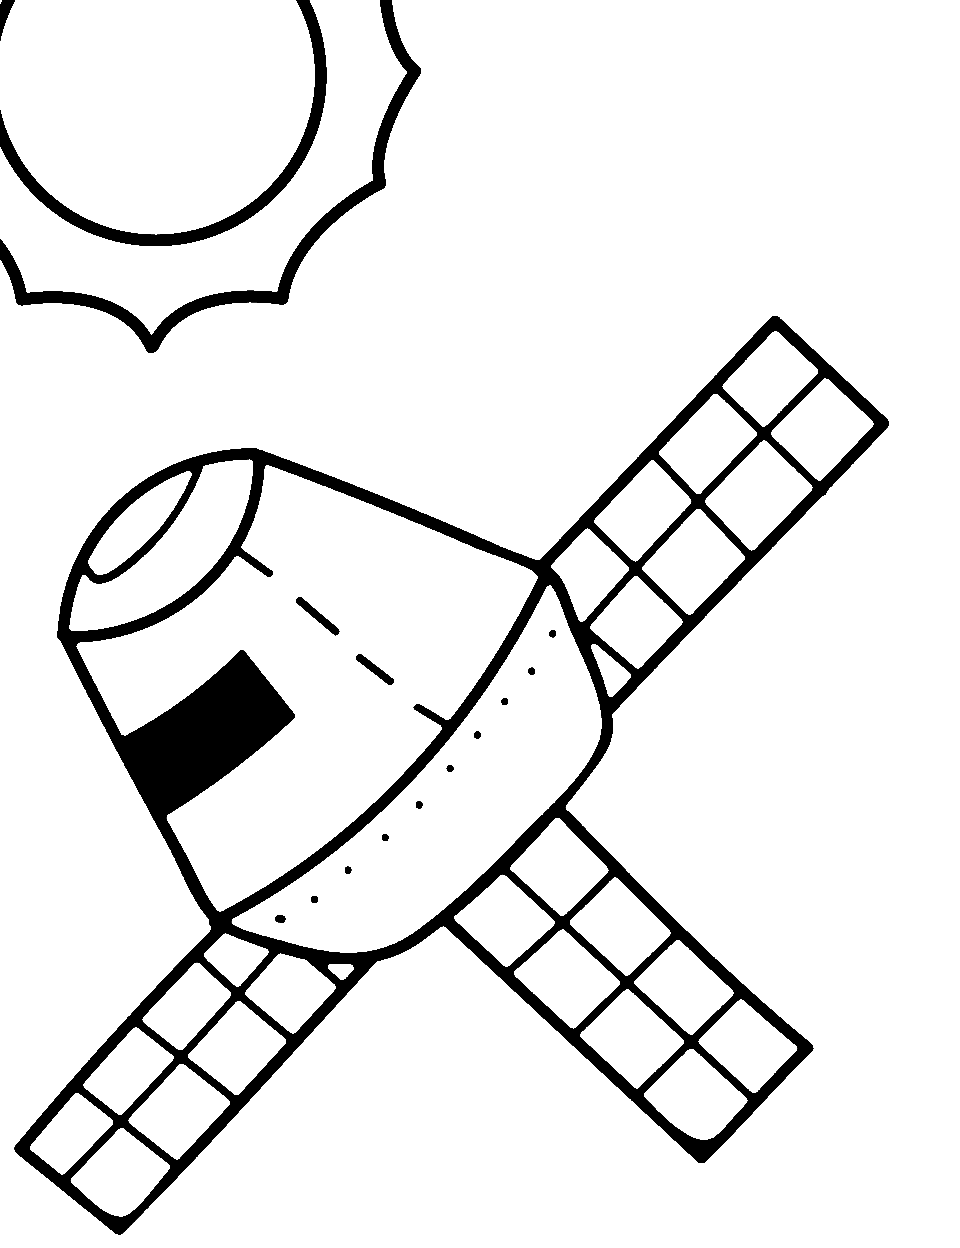 Satellite's Solar Sails Coloring Page - A satellite with large solar sails collecting energy.